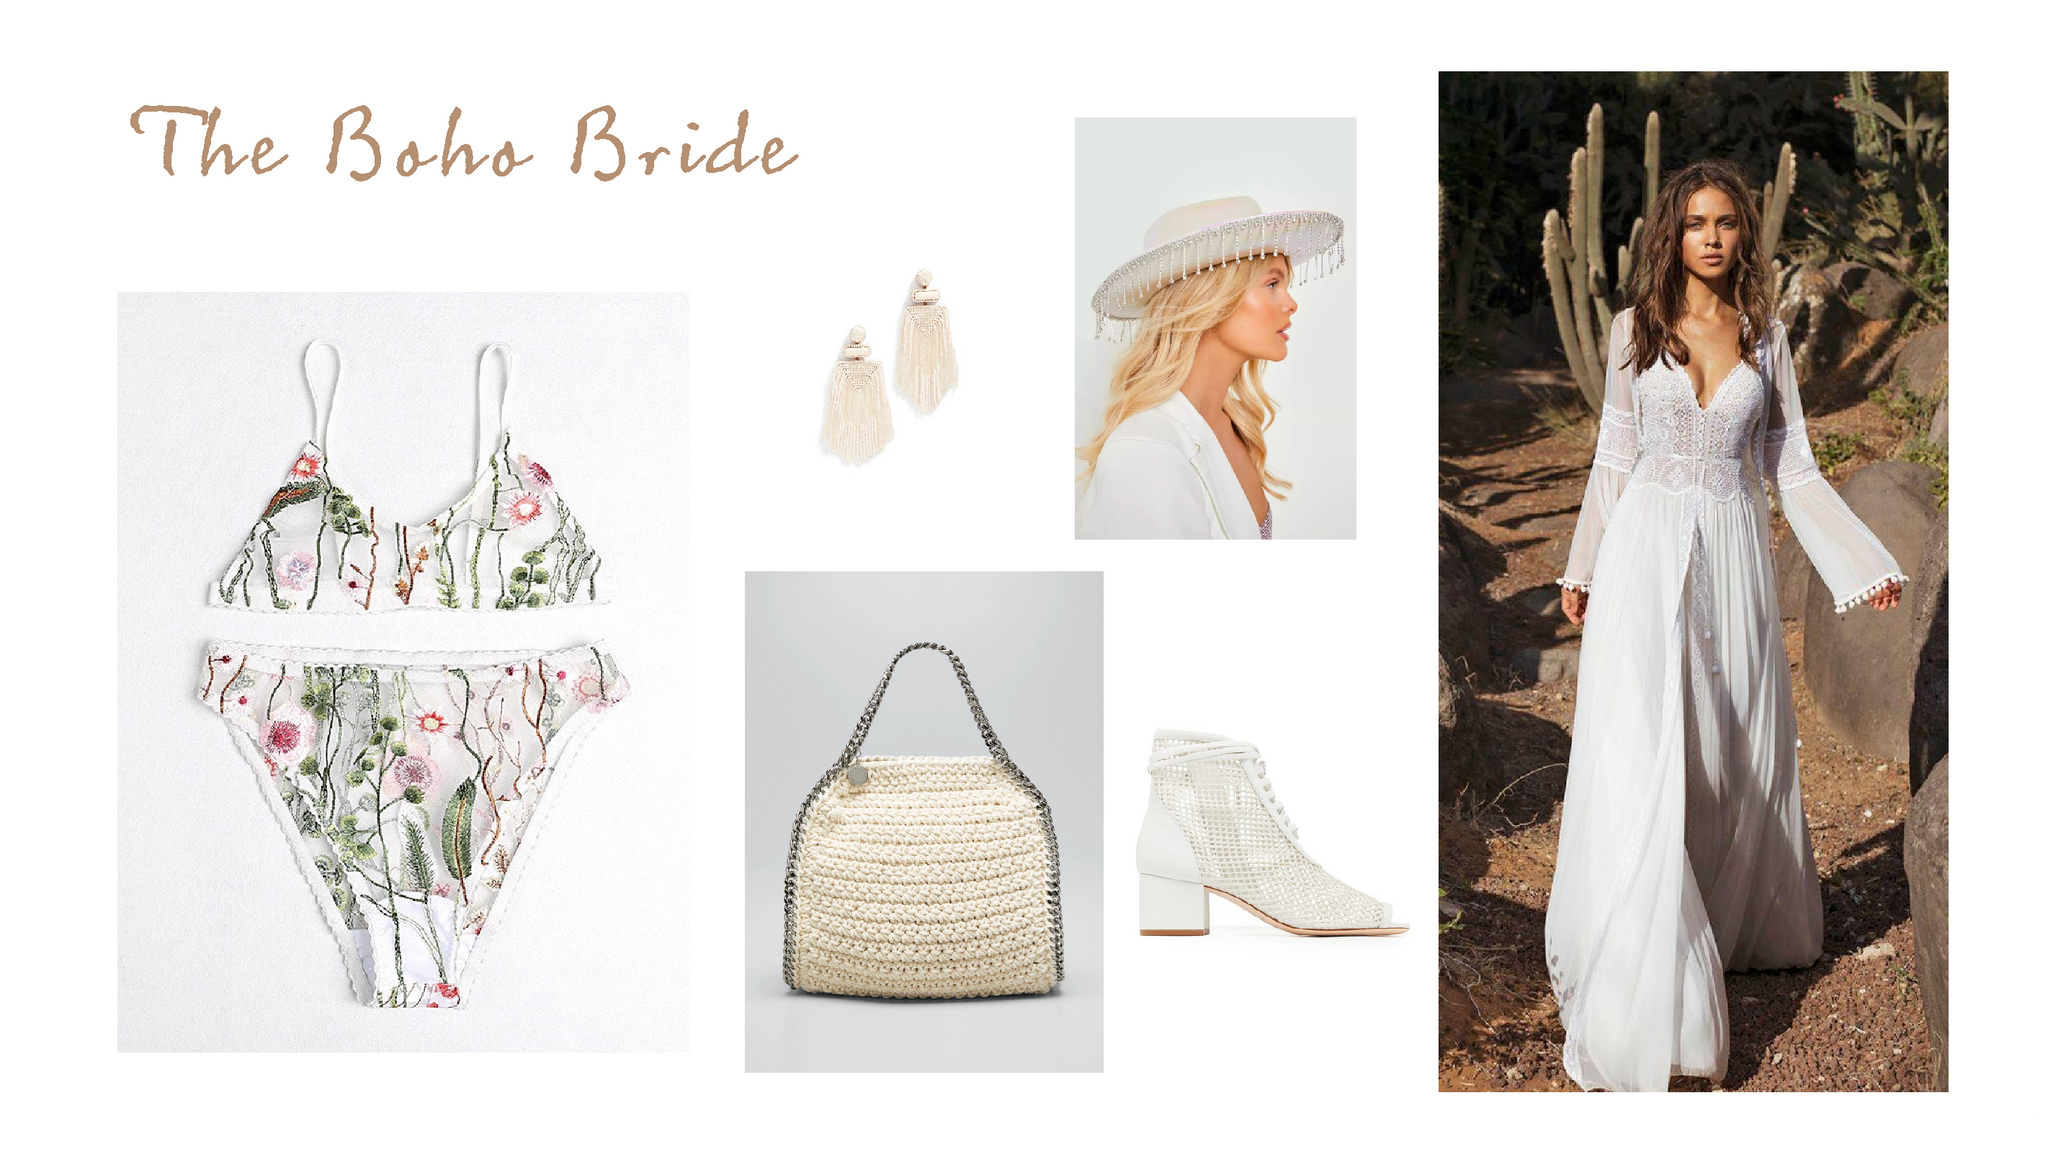 bohemian brides choses white boots and cute knit bag for her wedding, a botanical lingerie set would be perfect for her